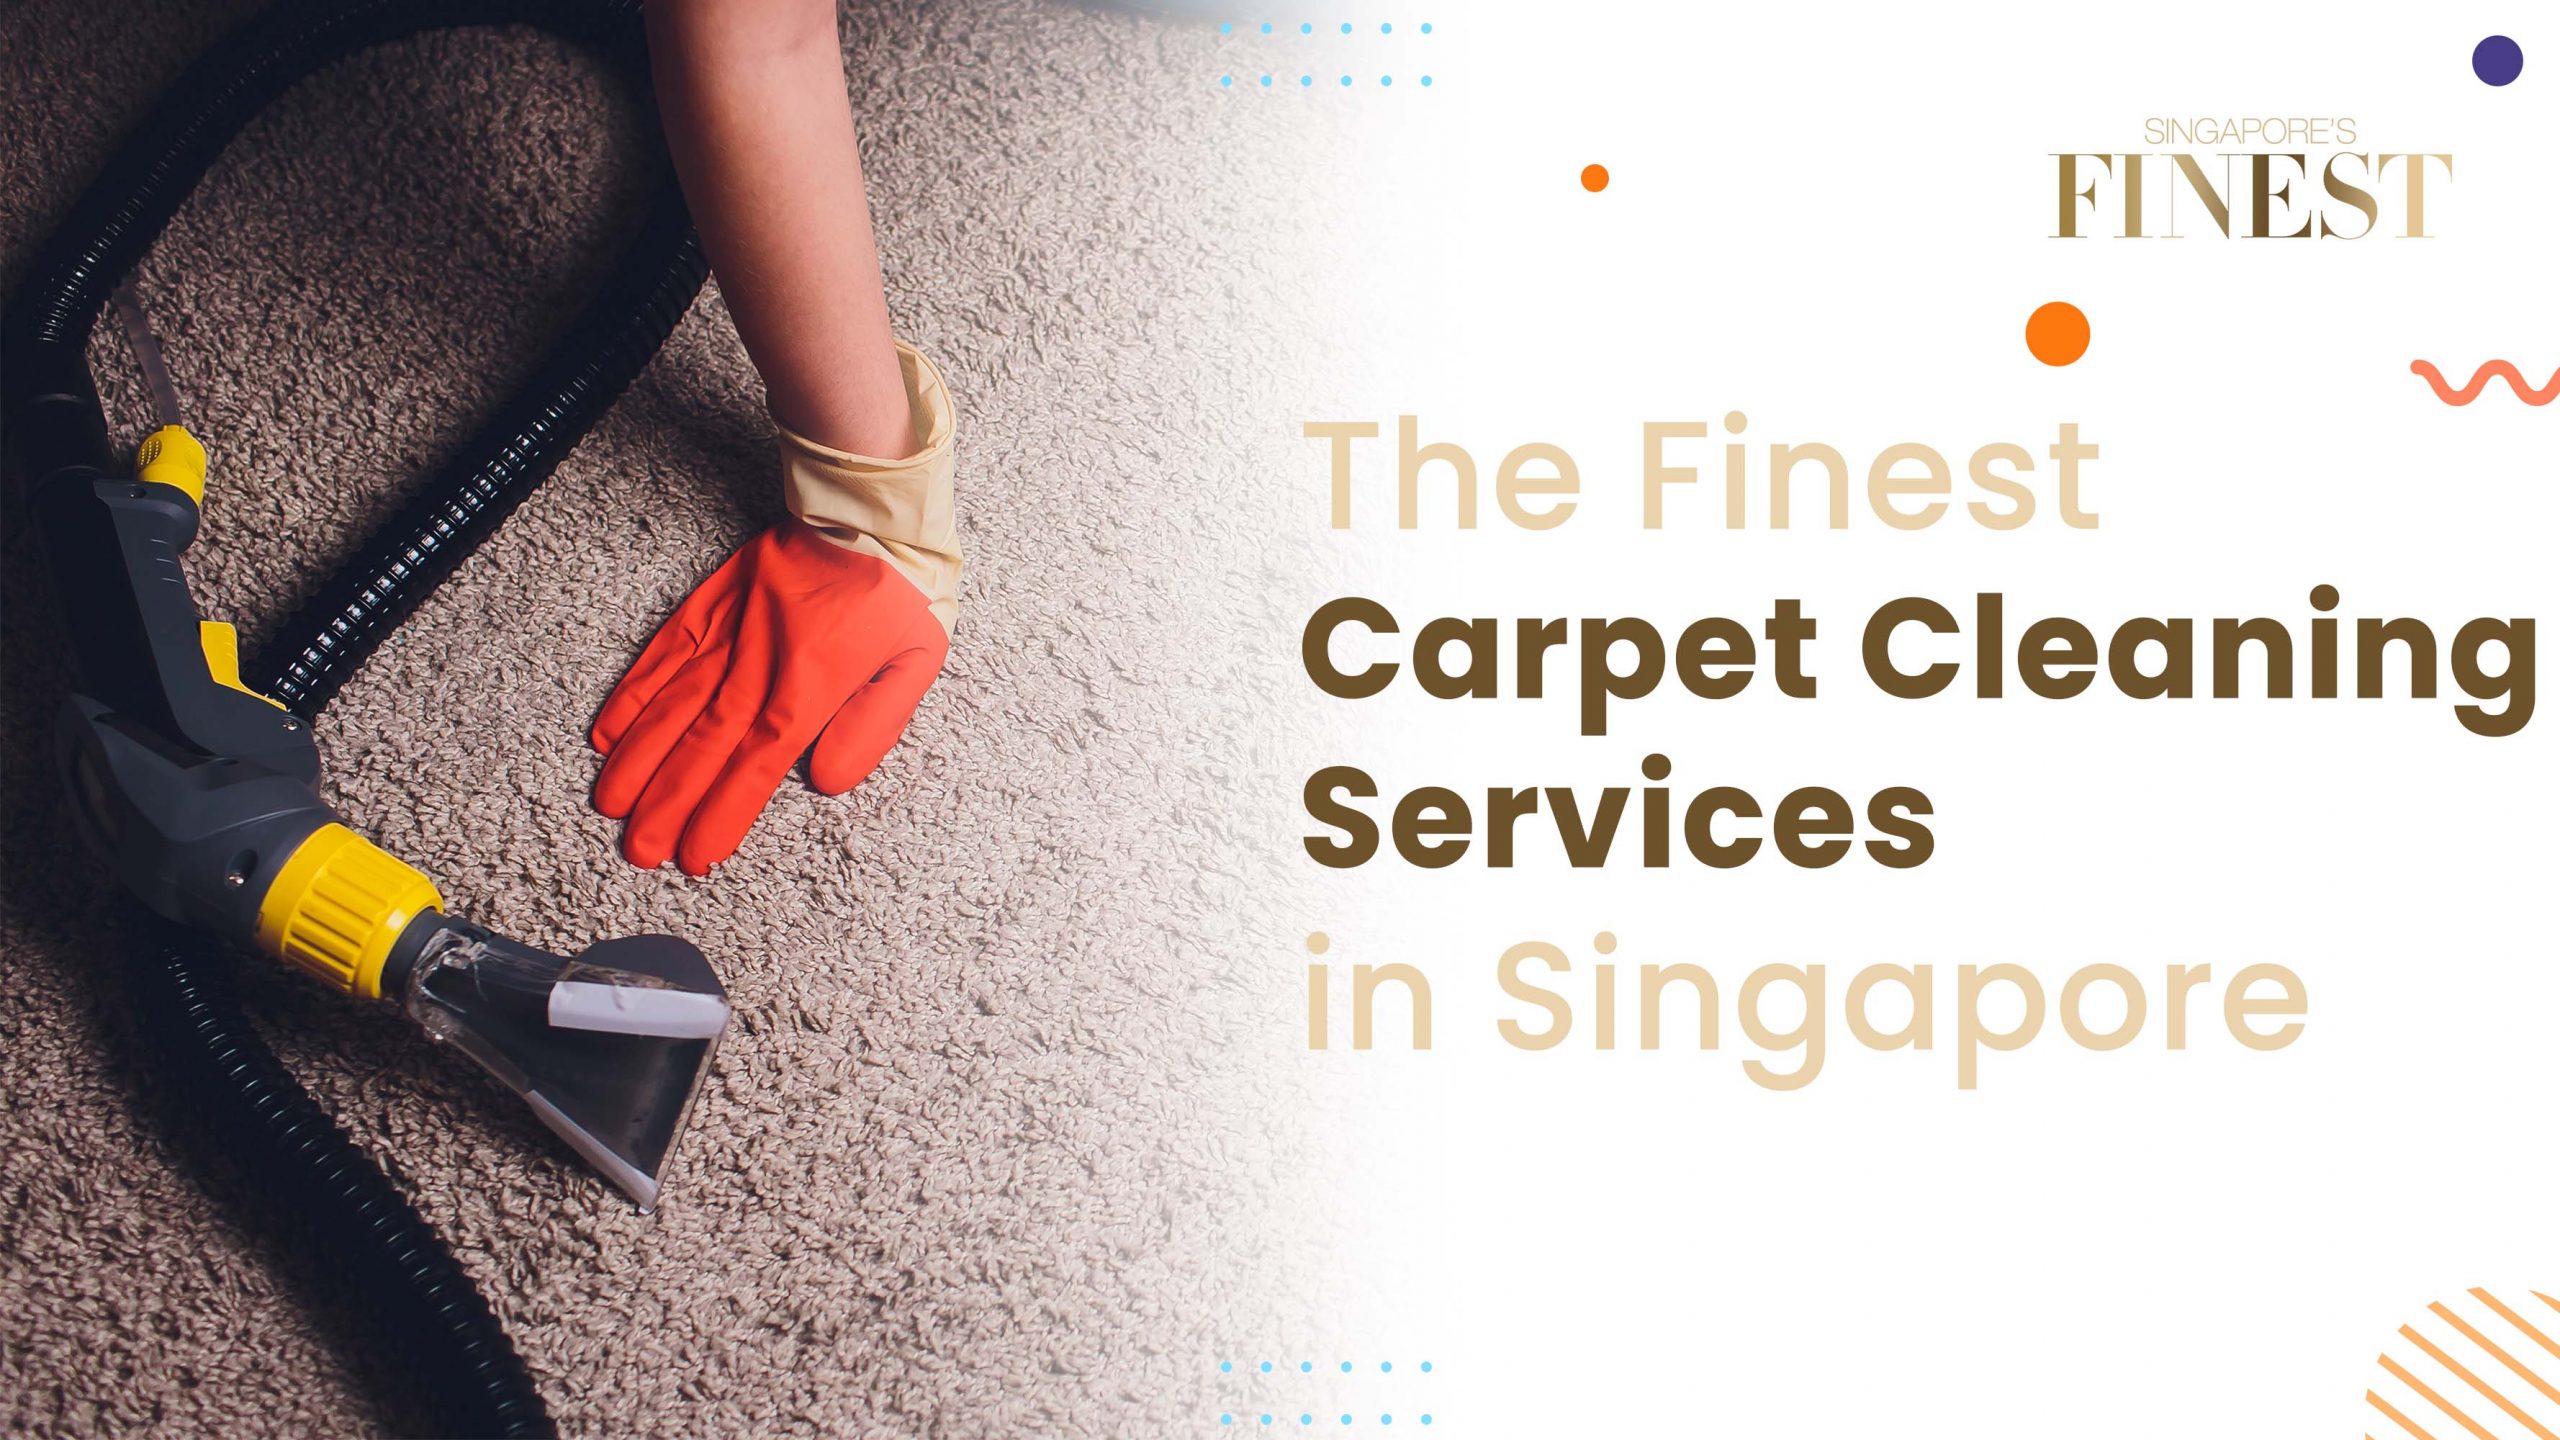 Finest Carpet Cleaning Services in Singapore